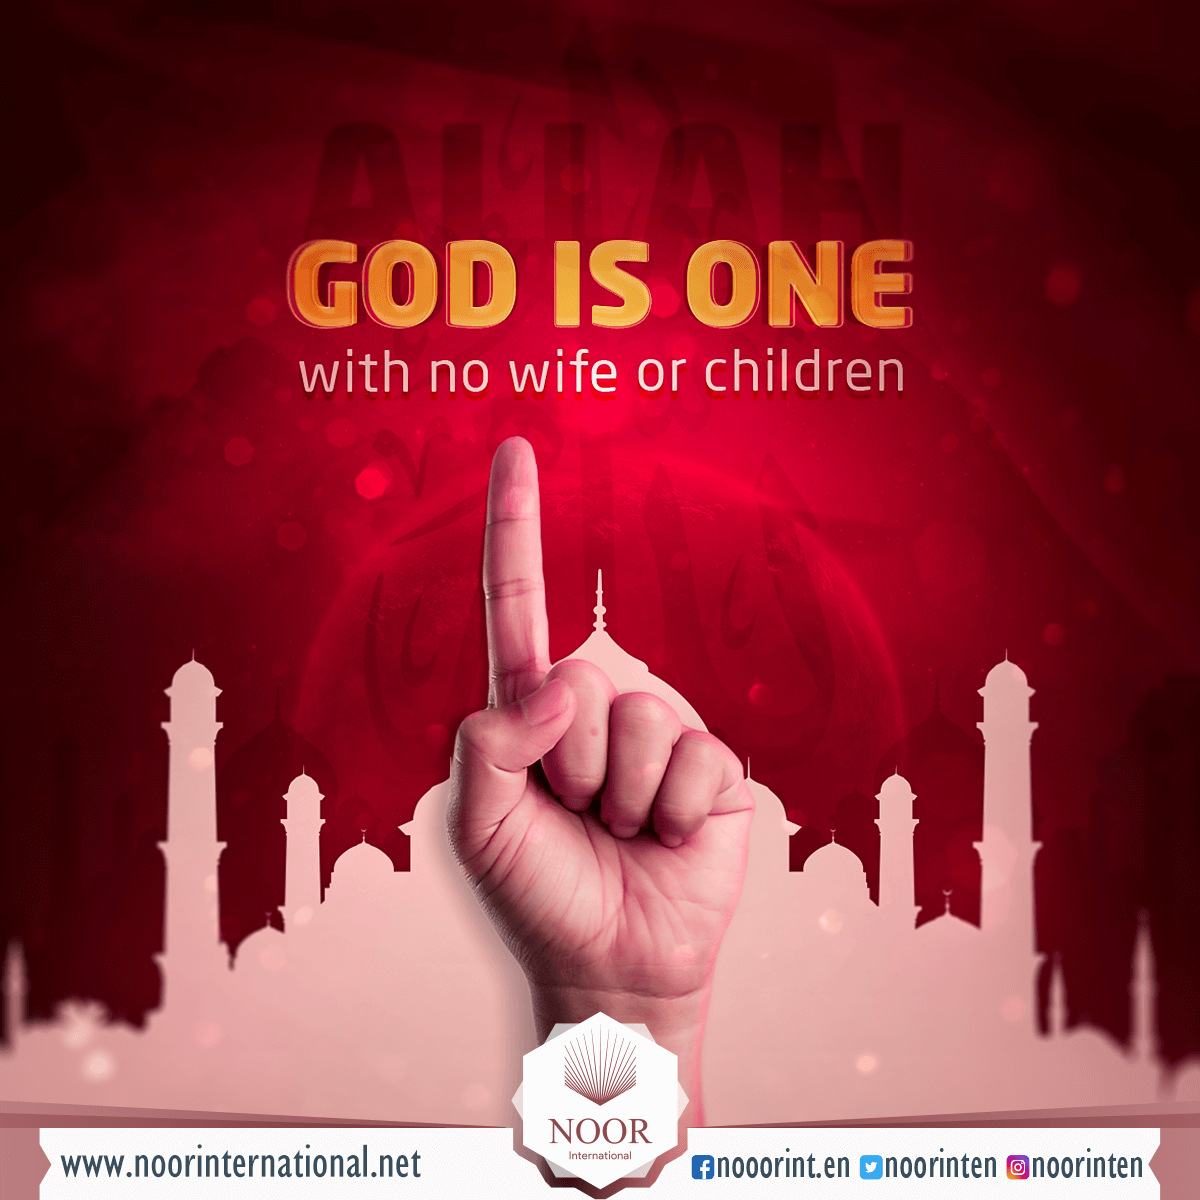 God ( Allah ) is one with no wife or children